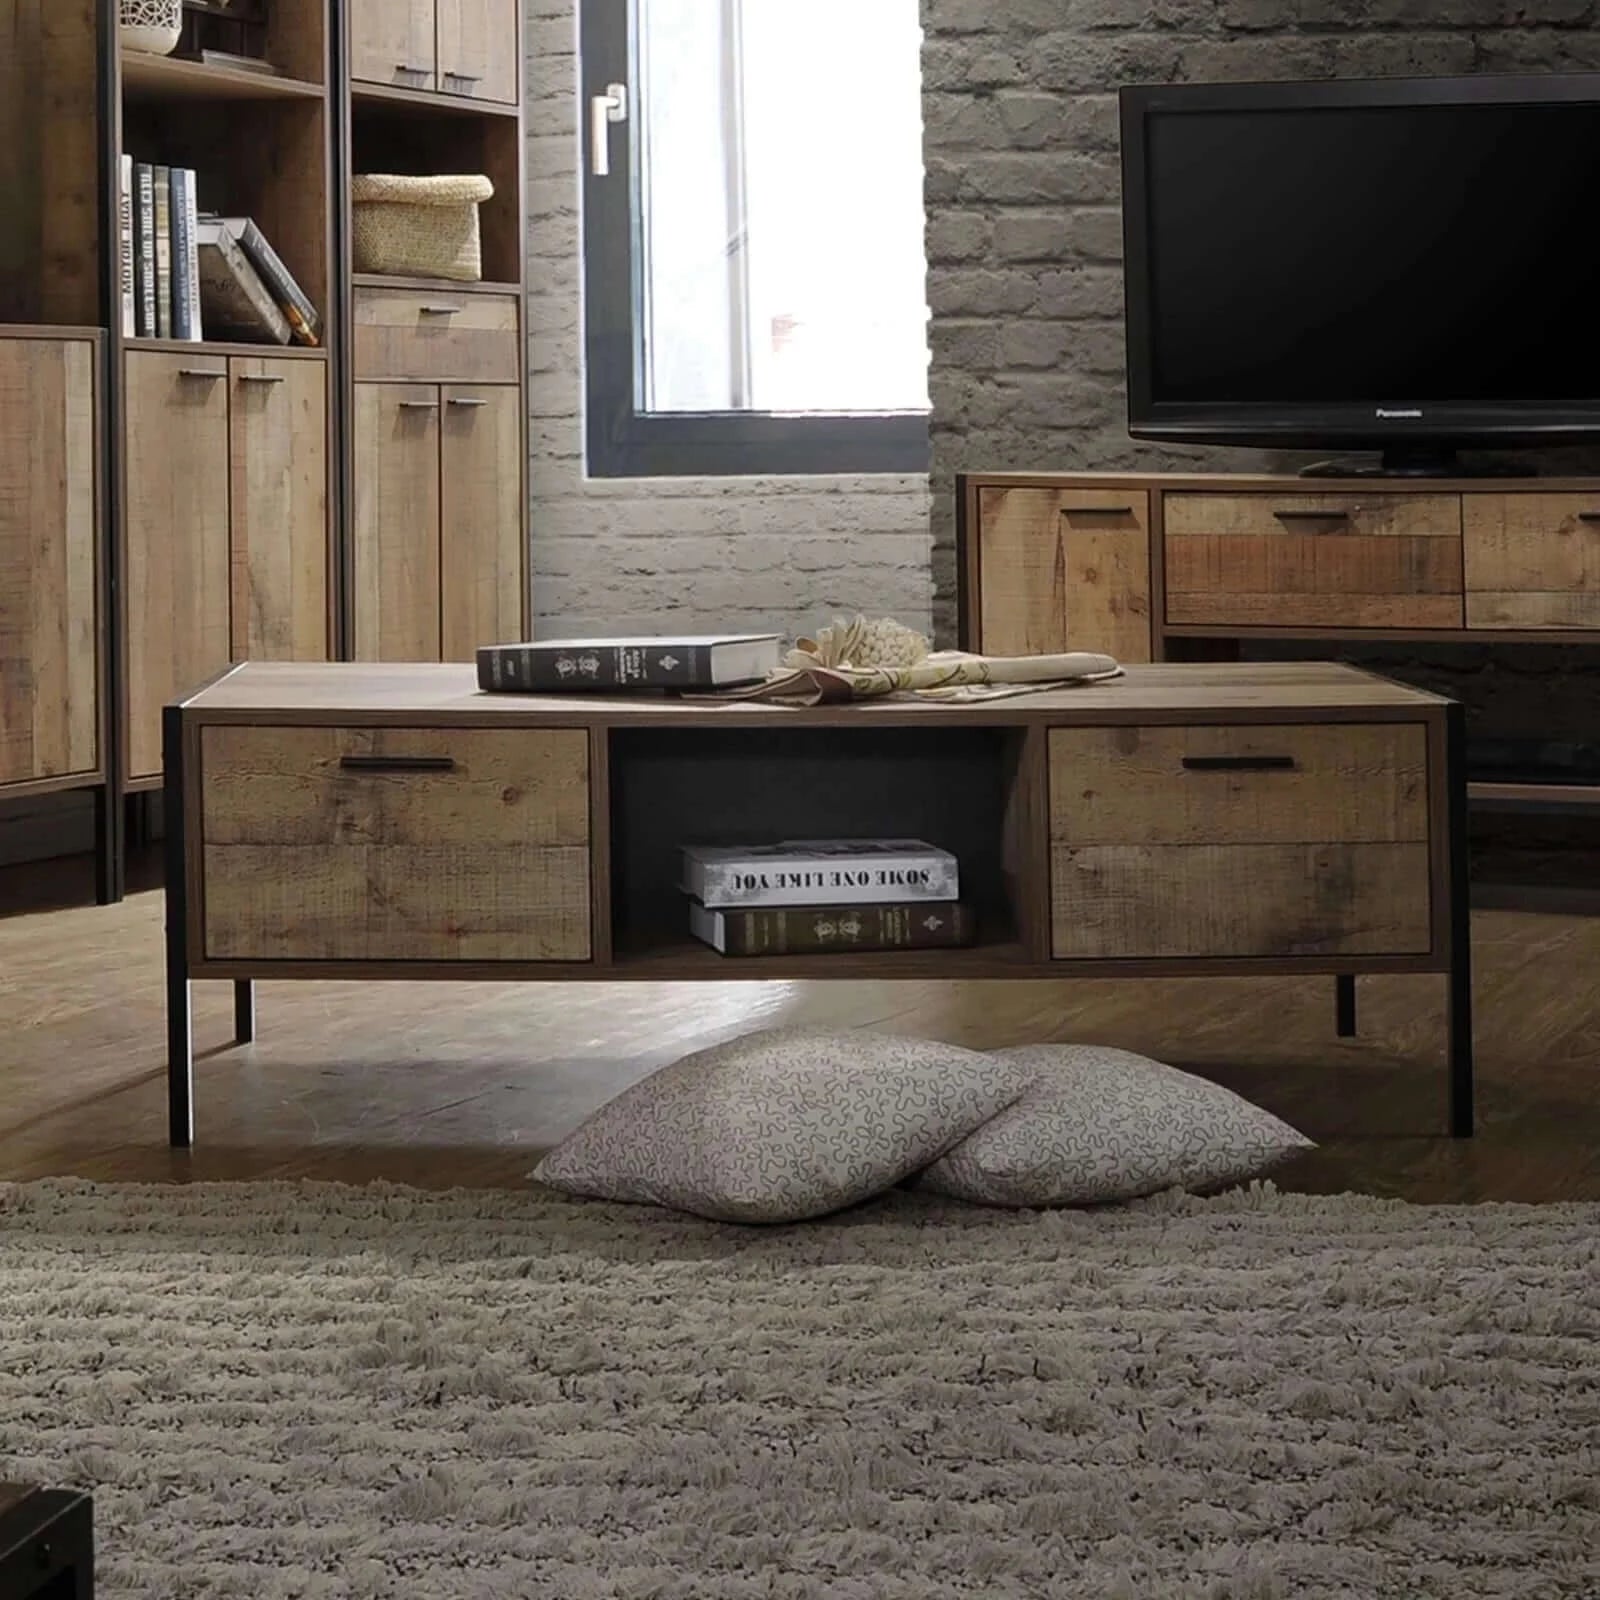 Coffee Table 2 Drawers Particle Board Storage in Oak Colour-Upinteriors